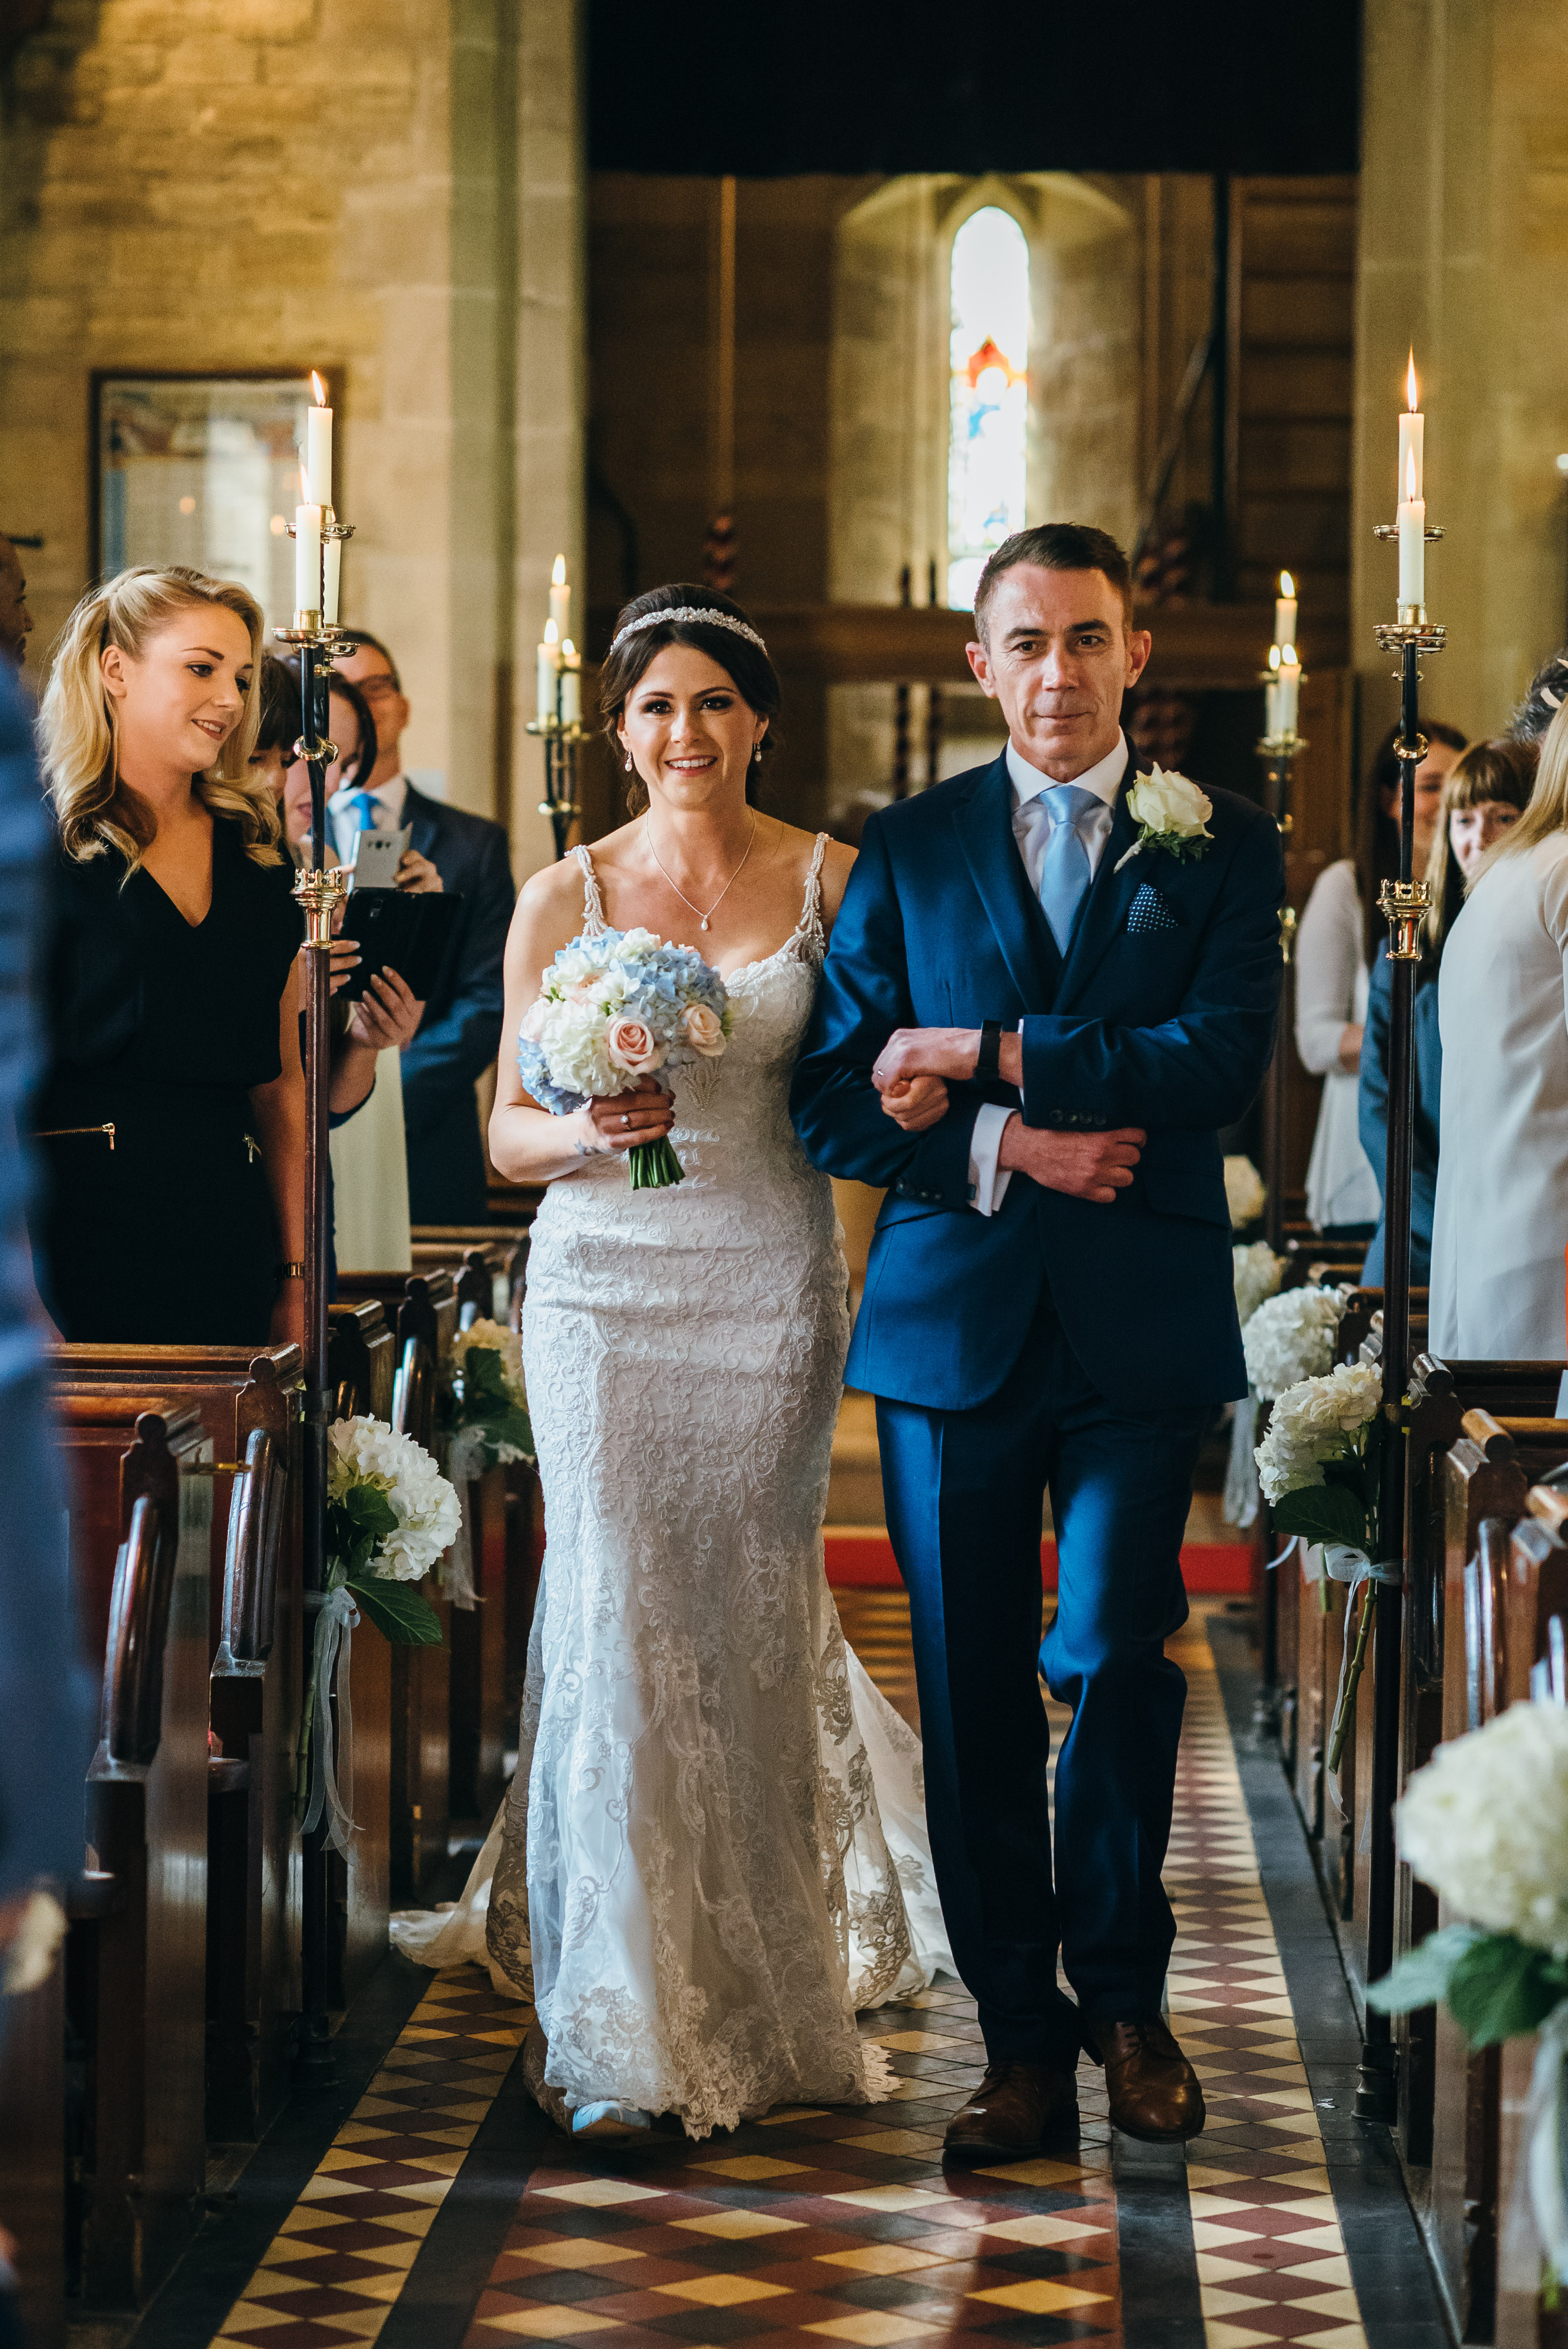 Wedding at St Marys Church, Lower Slaughter 